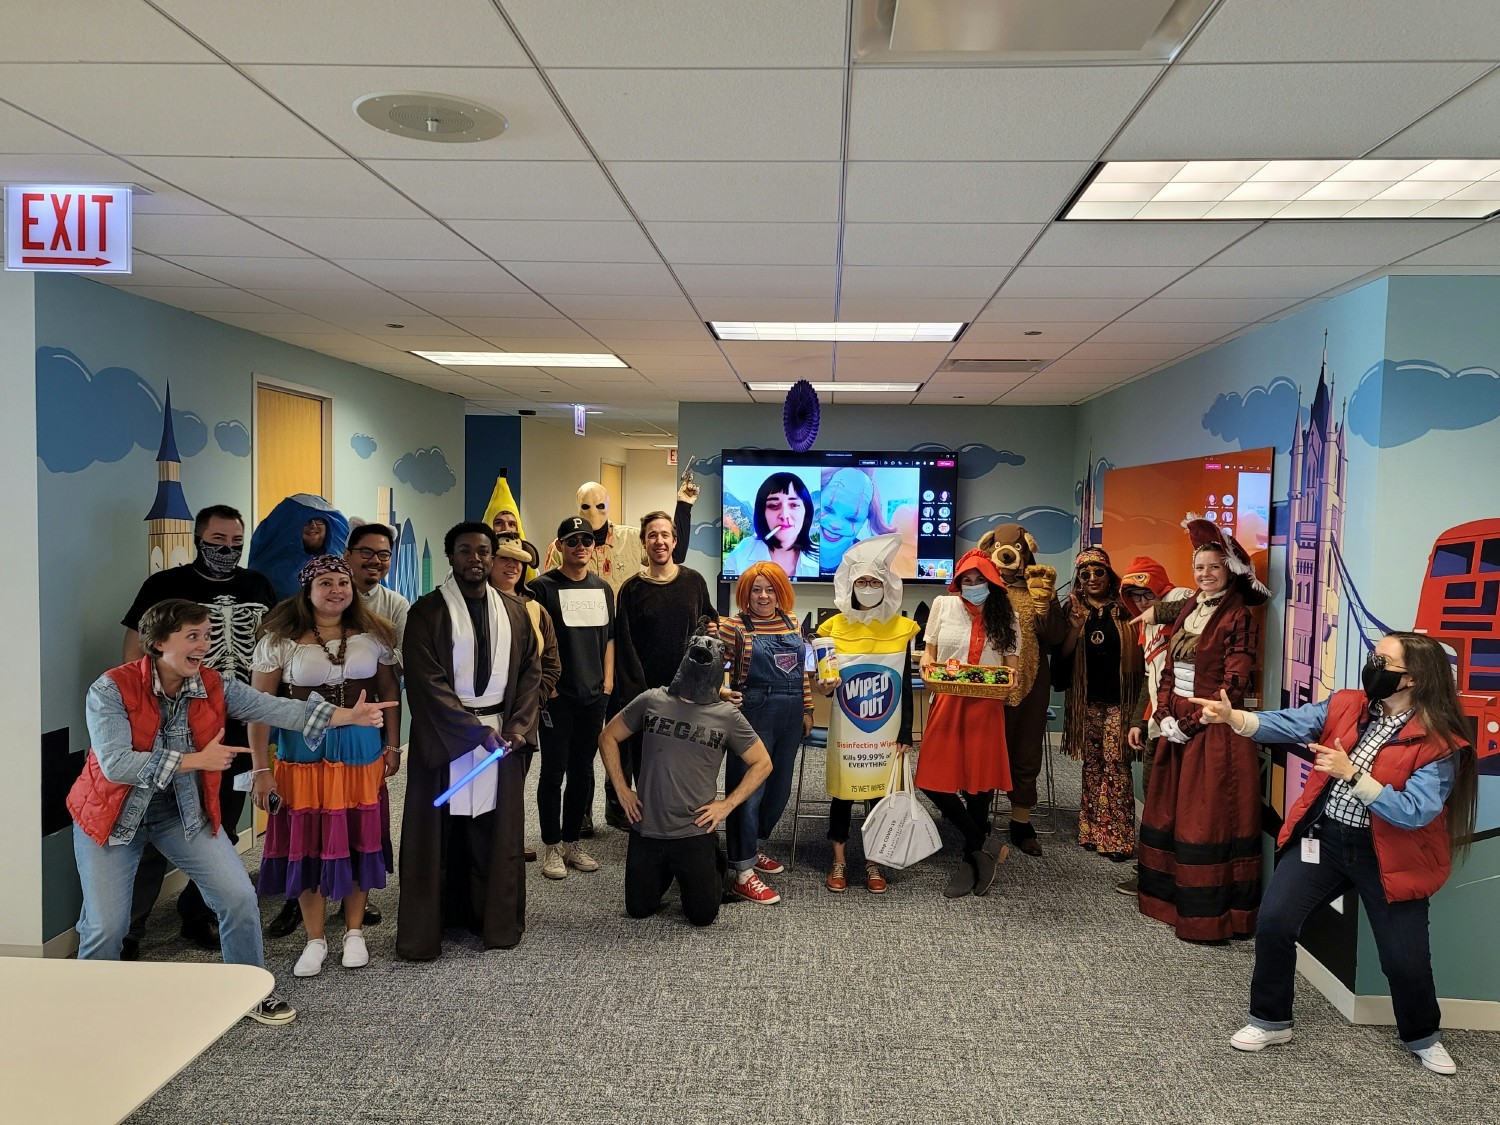 Celebrating a very hybrid Halloween at Credico with a costume contest!